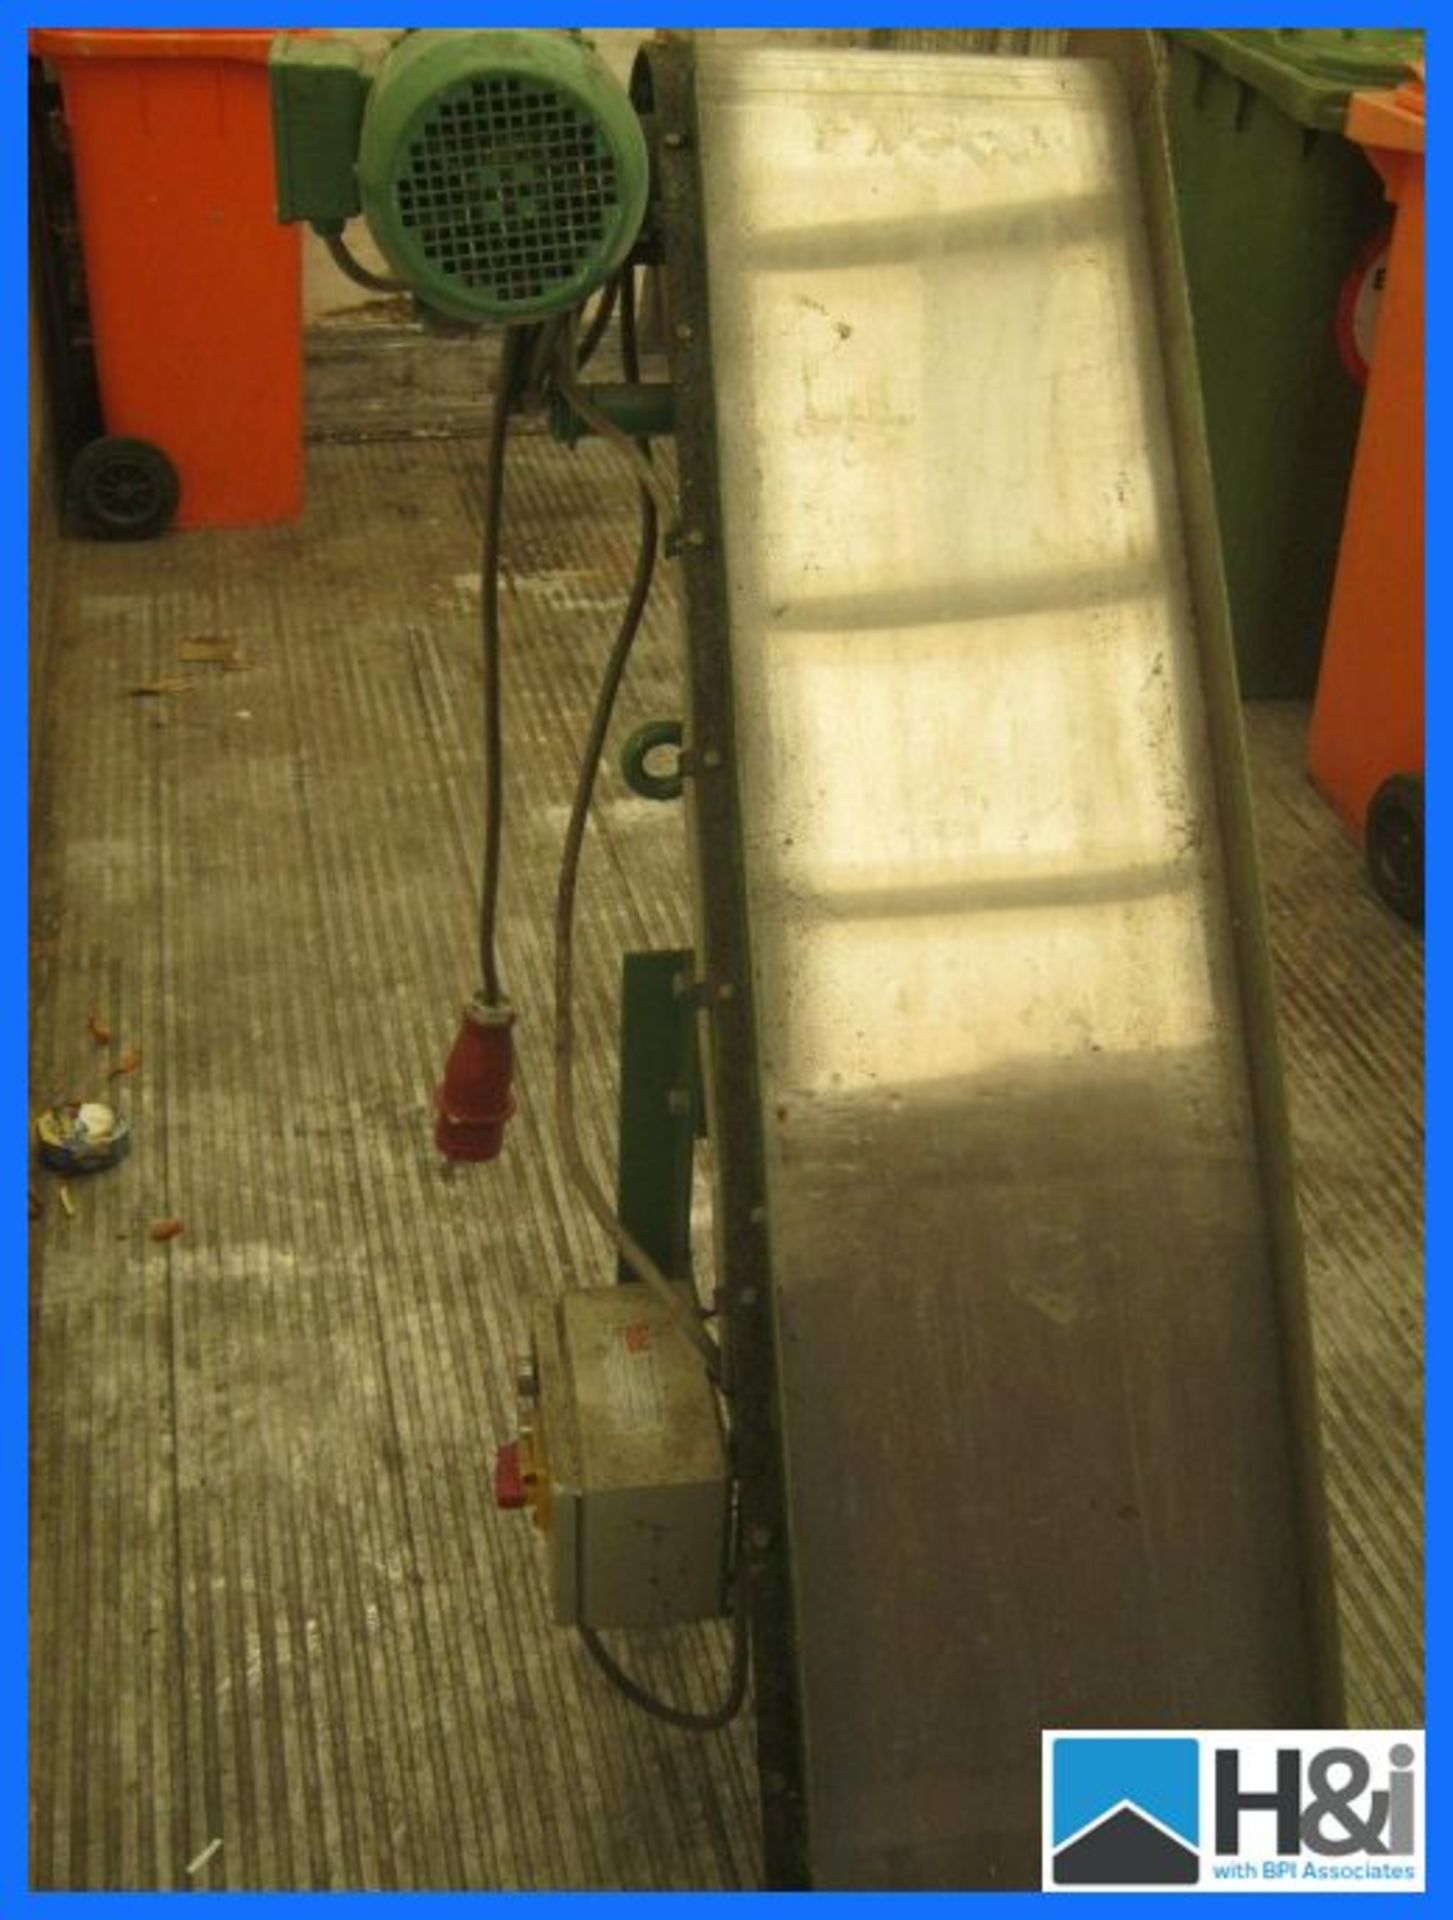 ERIEZ MAGNETIC CHIP CONVEYOR. For moving and elevating ferrous materials. Untested but we are - Image 7 of 10